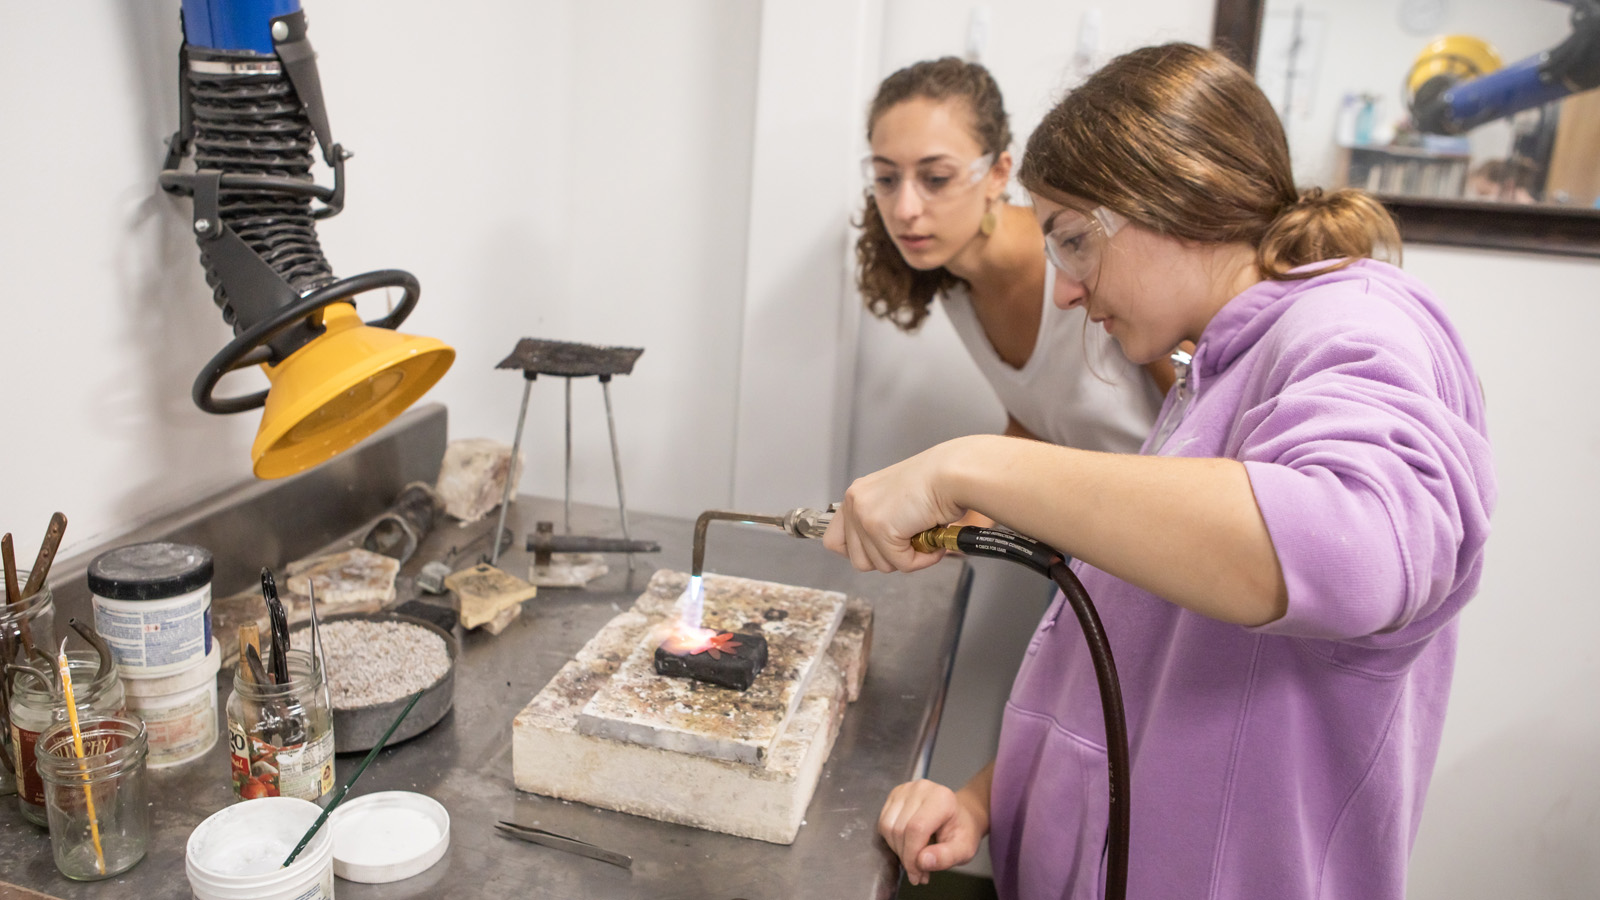 a youth with a torch firing her stamped jewelry, and another youth looks on.